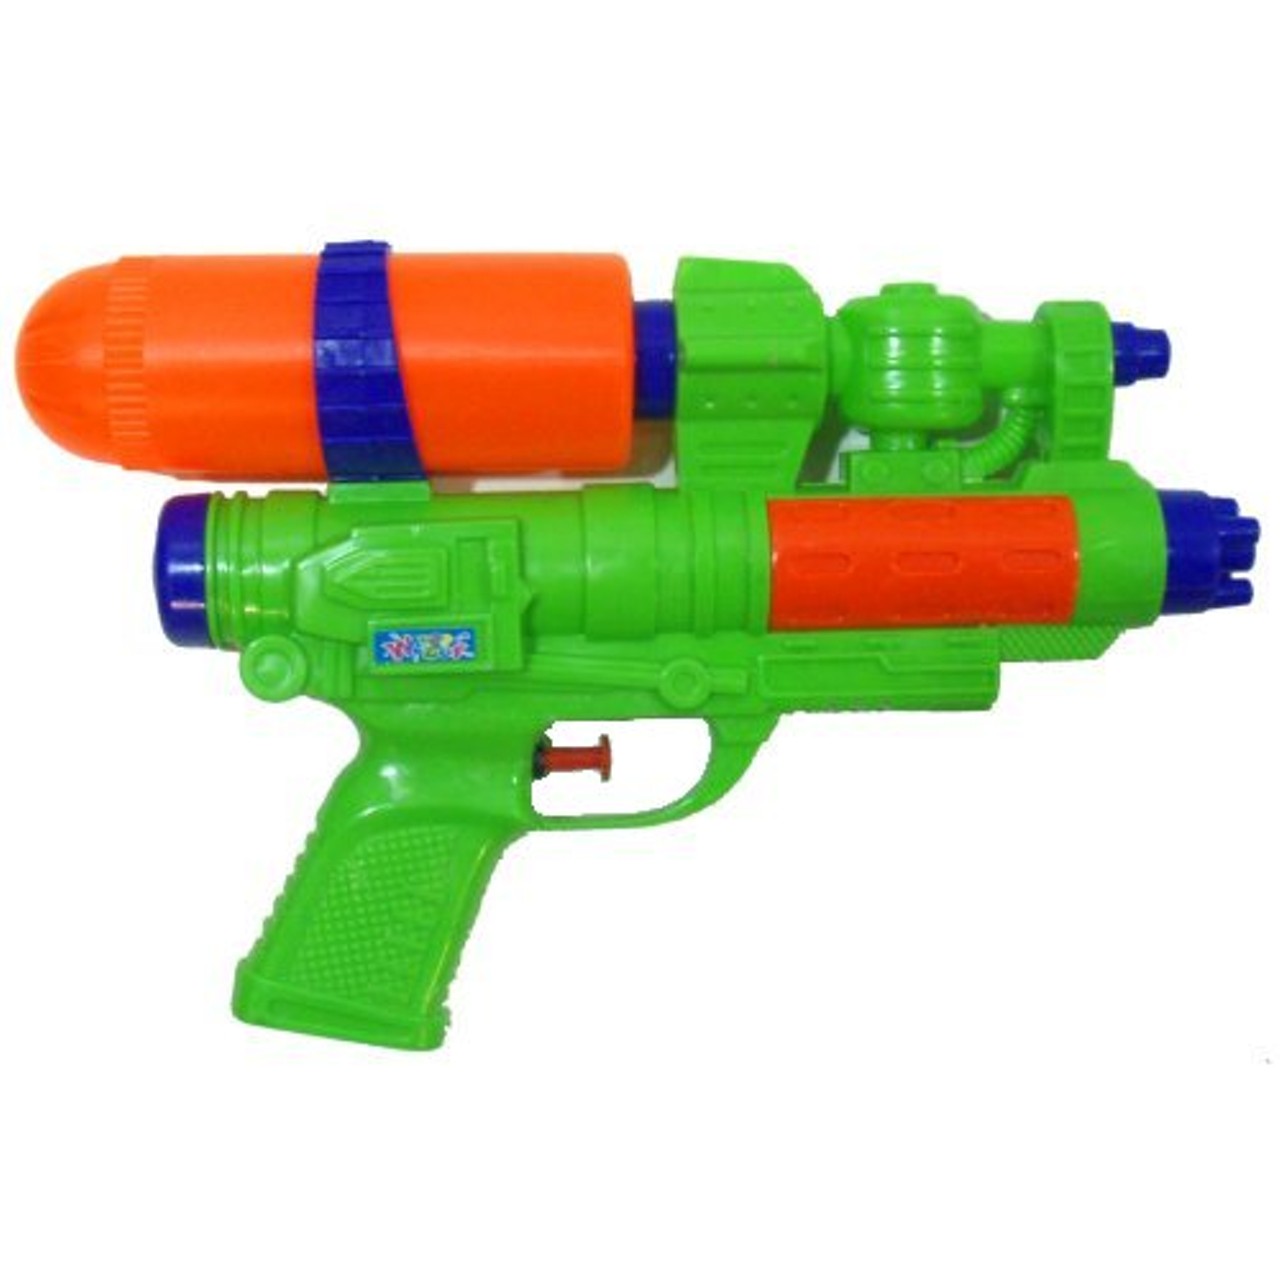 You could be at a water gun fight and someone decides to bring a real gun.
Photo via Stream Machine Store